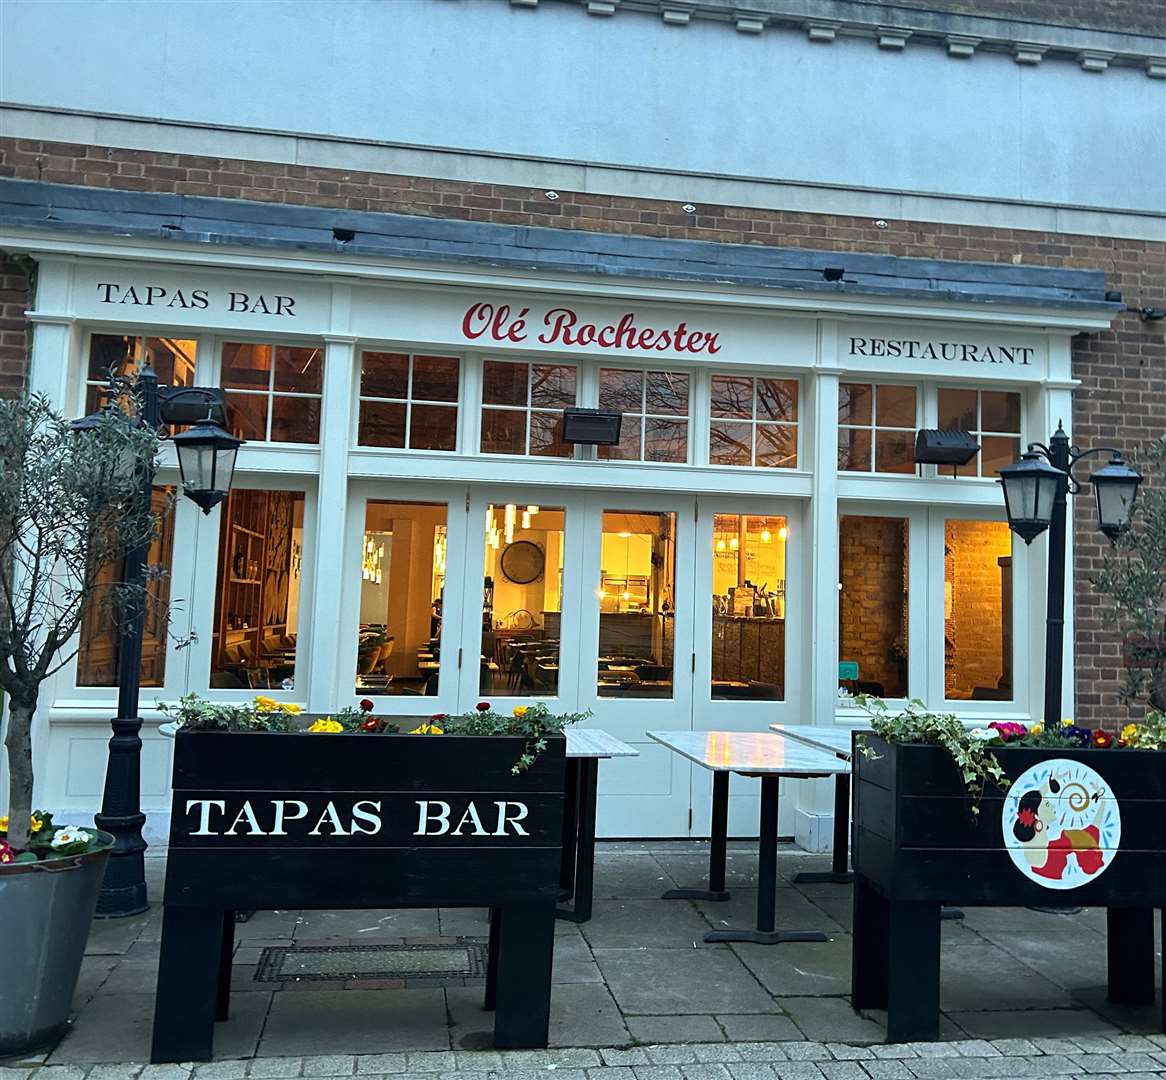 Ole - tapas bar and restaurant is now open